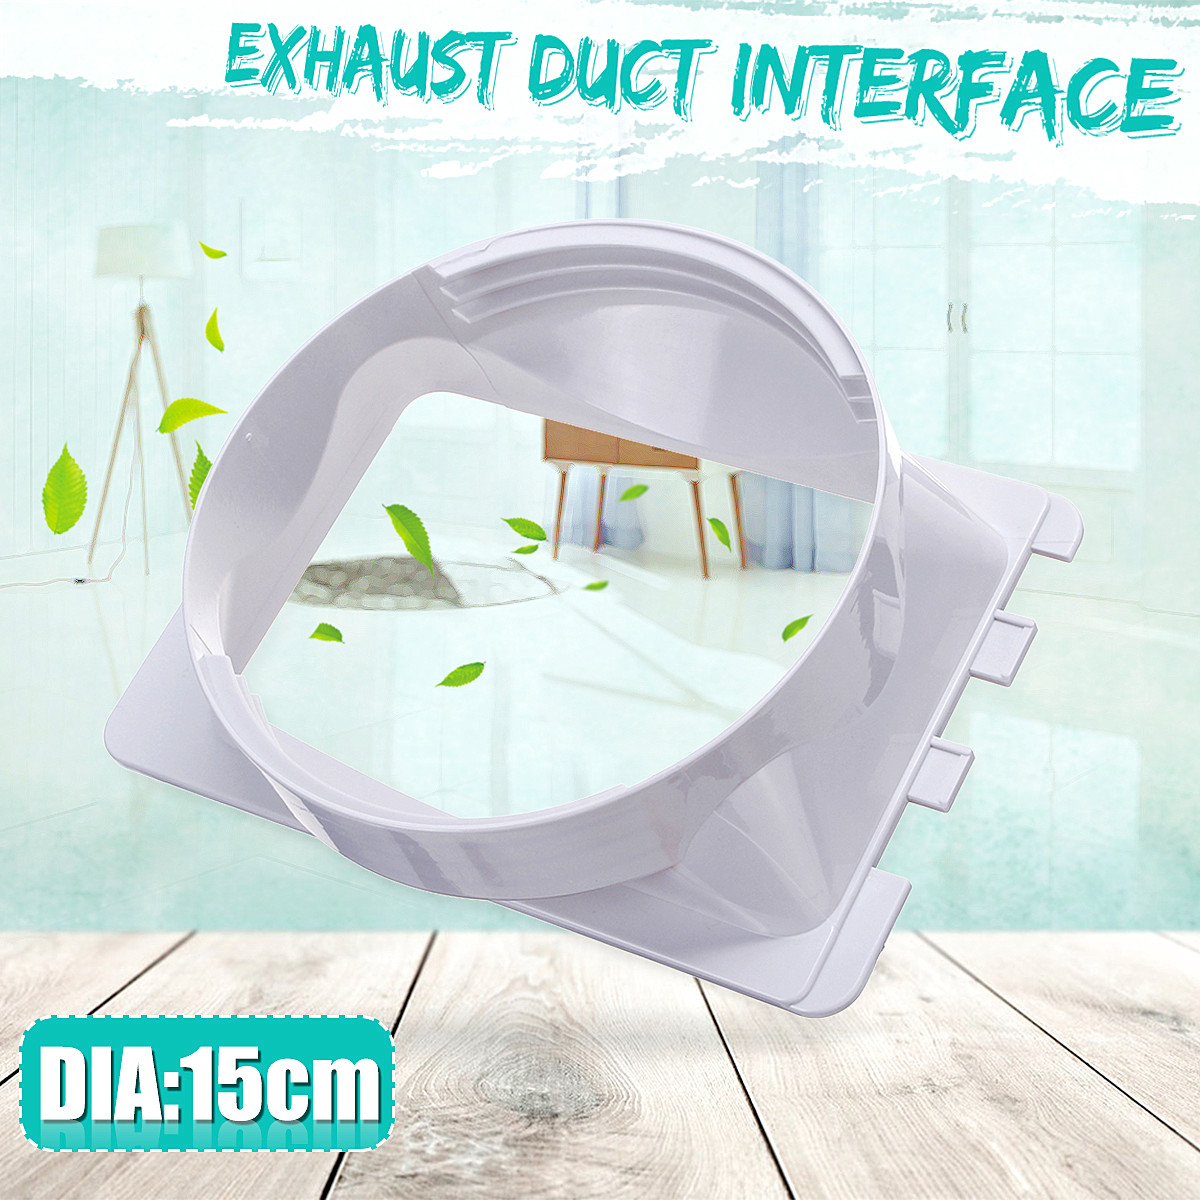 Diameter-15cm59-Inch-Portable-Air-Conditioning-Body-Exhaust-Duct-Interface-Adapter-1526387-2